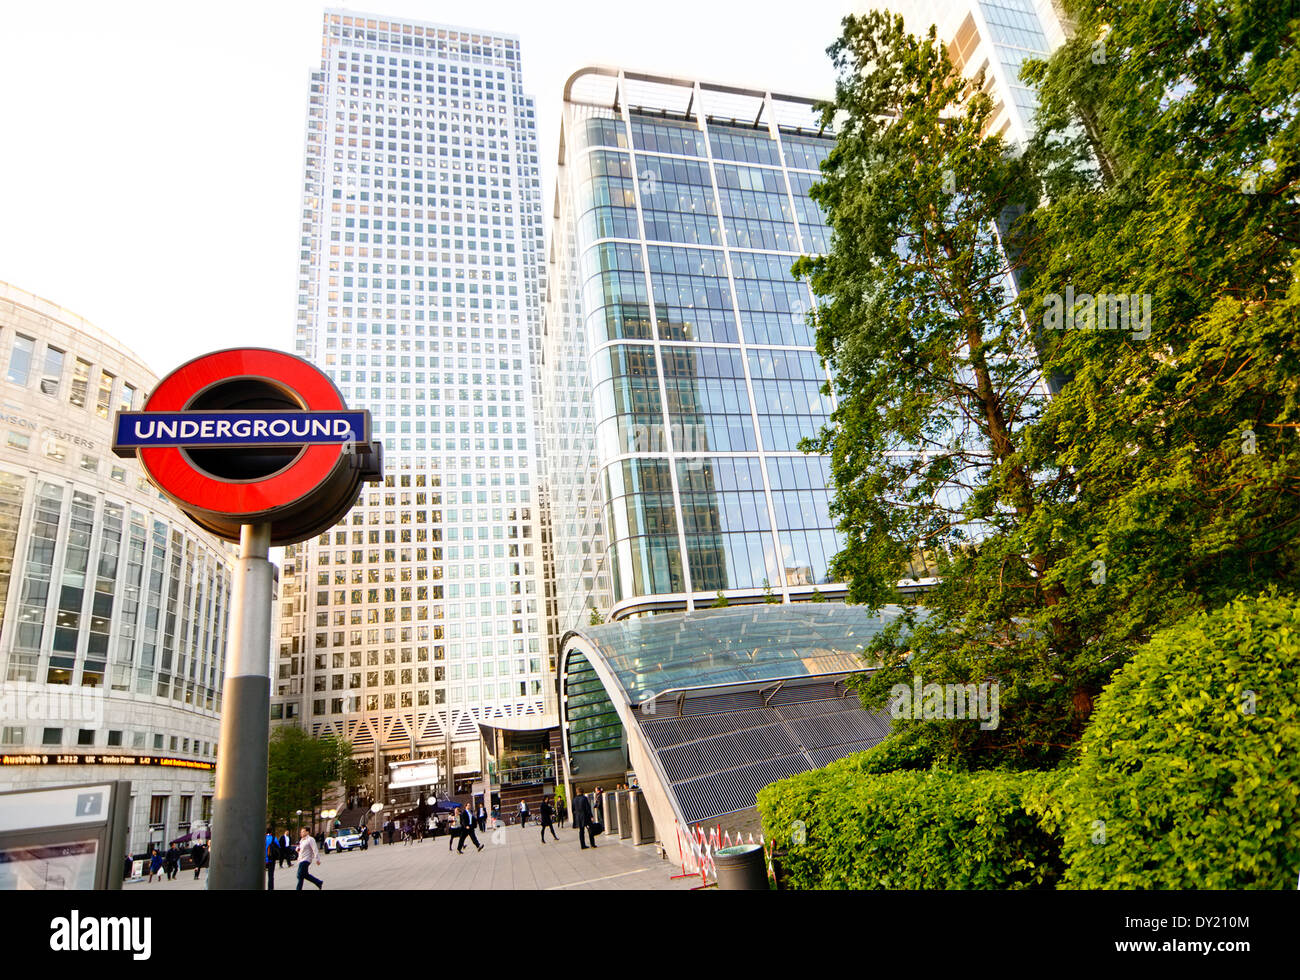 The Roundel in the City with Thomson-Reuters Building at Canary Wharf, London Stock Photo